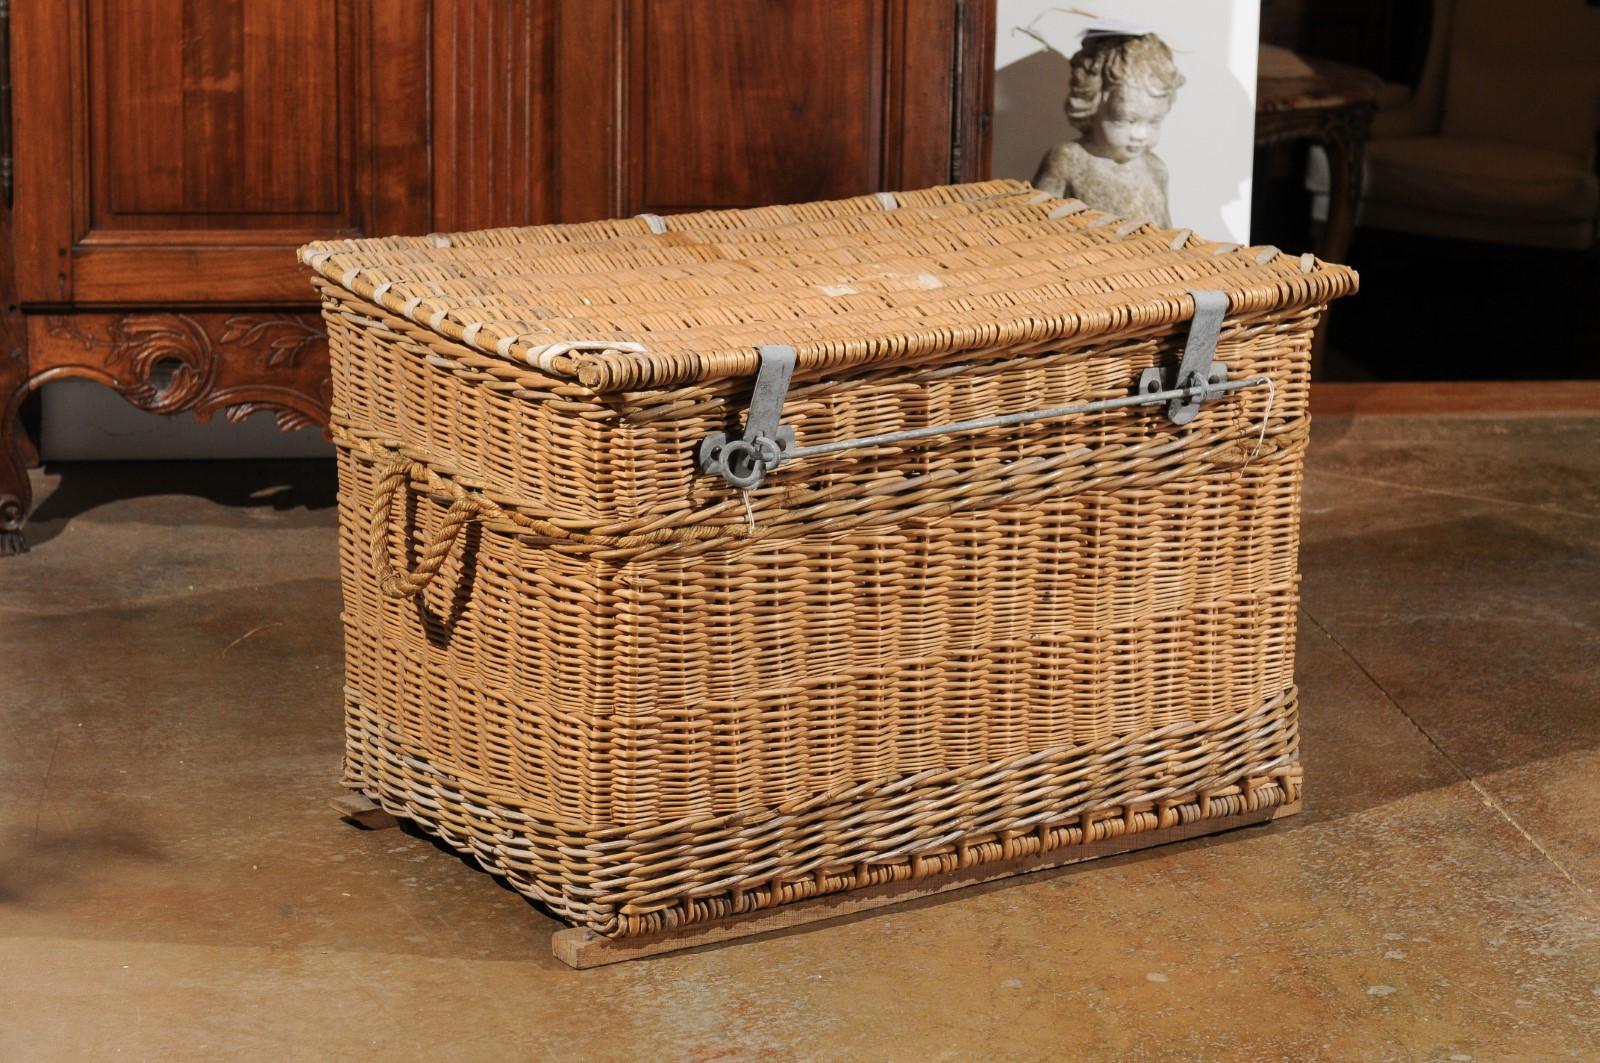 A French wicker trunk from the 19th century, with metal hardware and lateral handles. Born in France during the 19th century, this wicker trunk features a rectangular lid opening thanks to a metal bar to reveal a convenient storage space, lined with